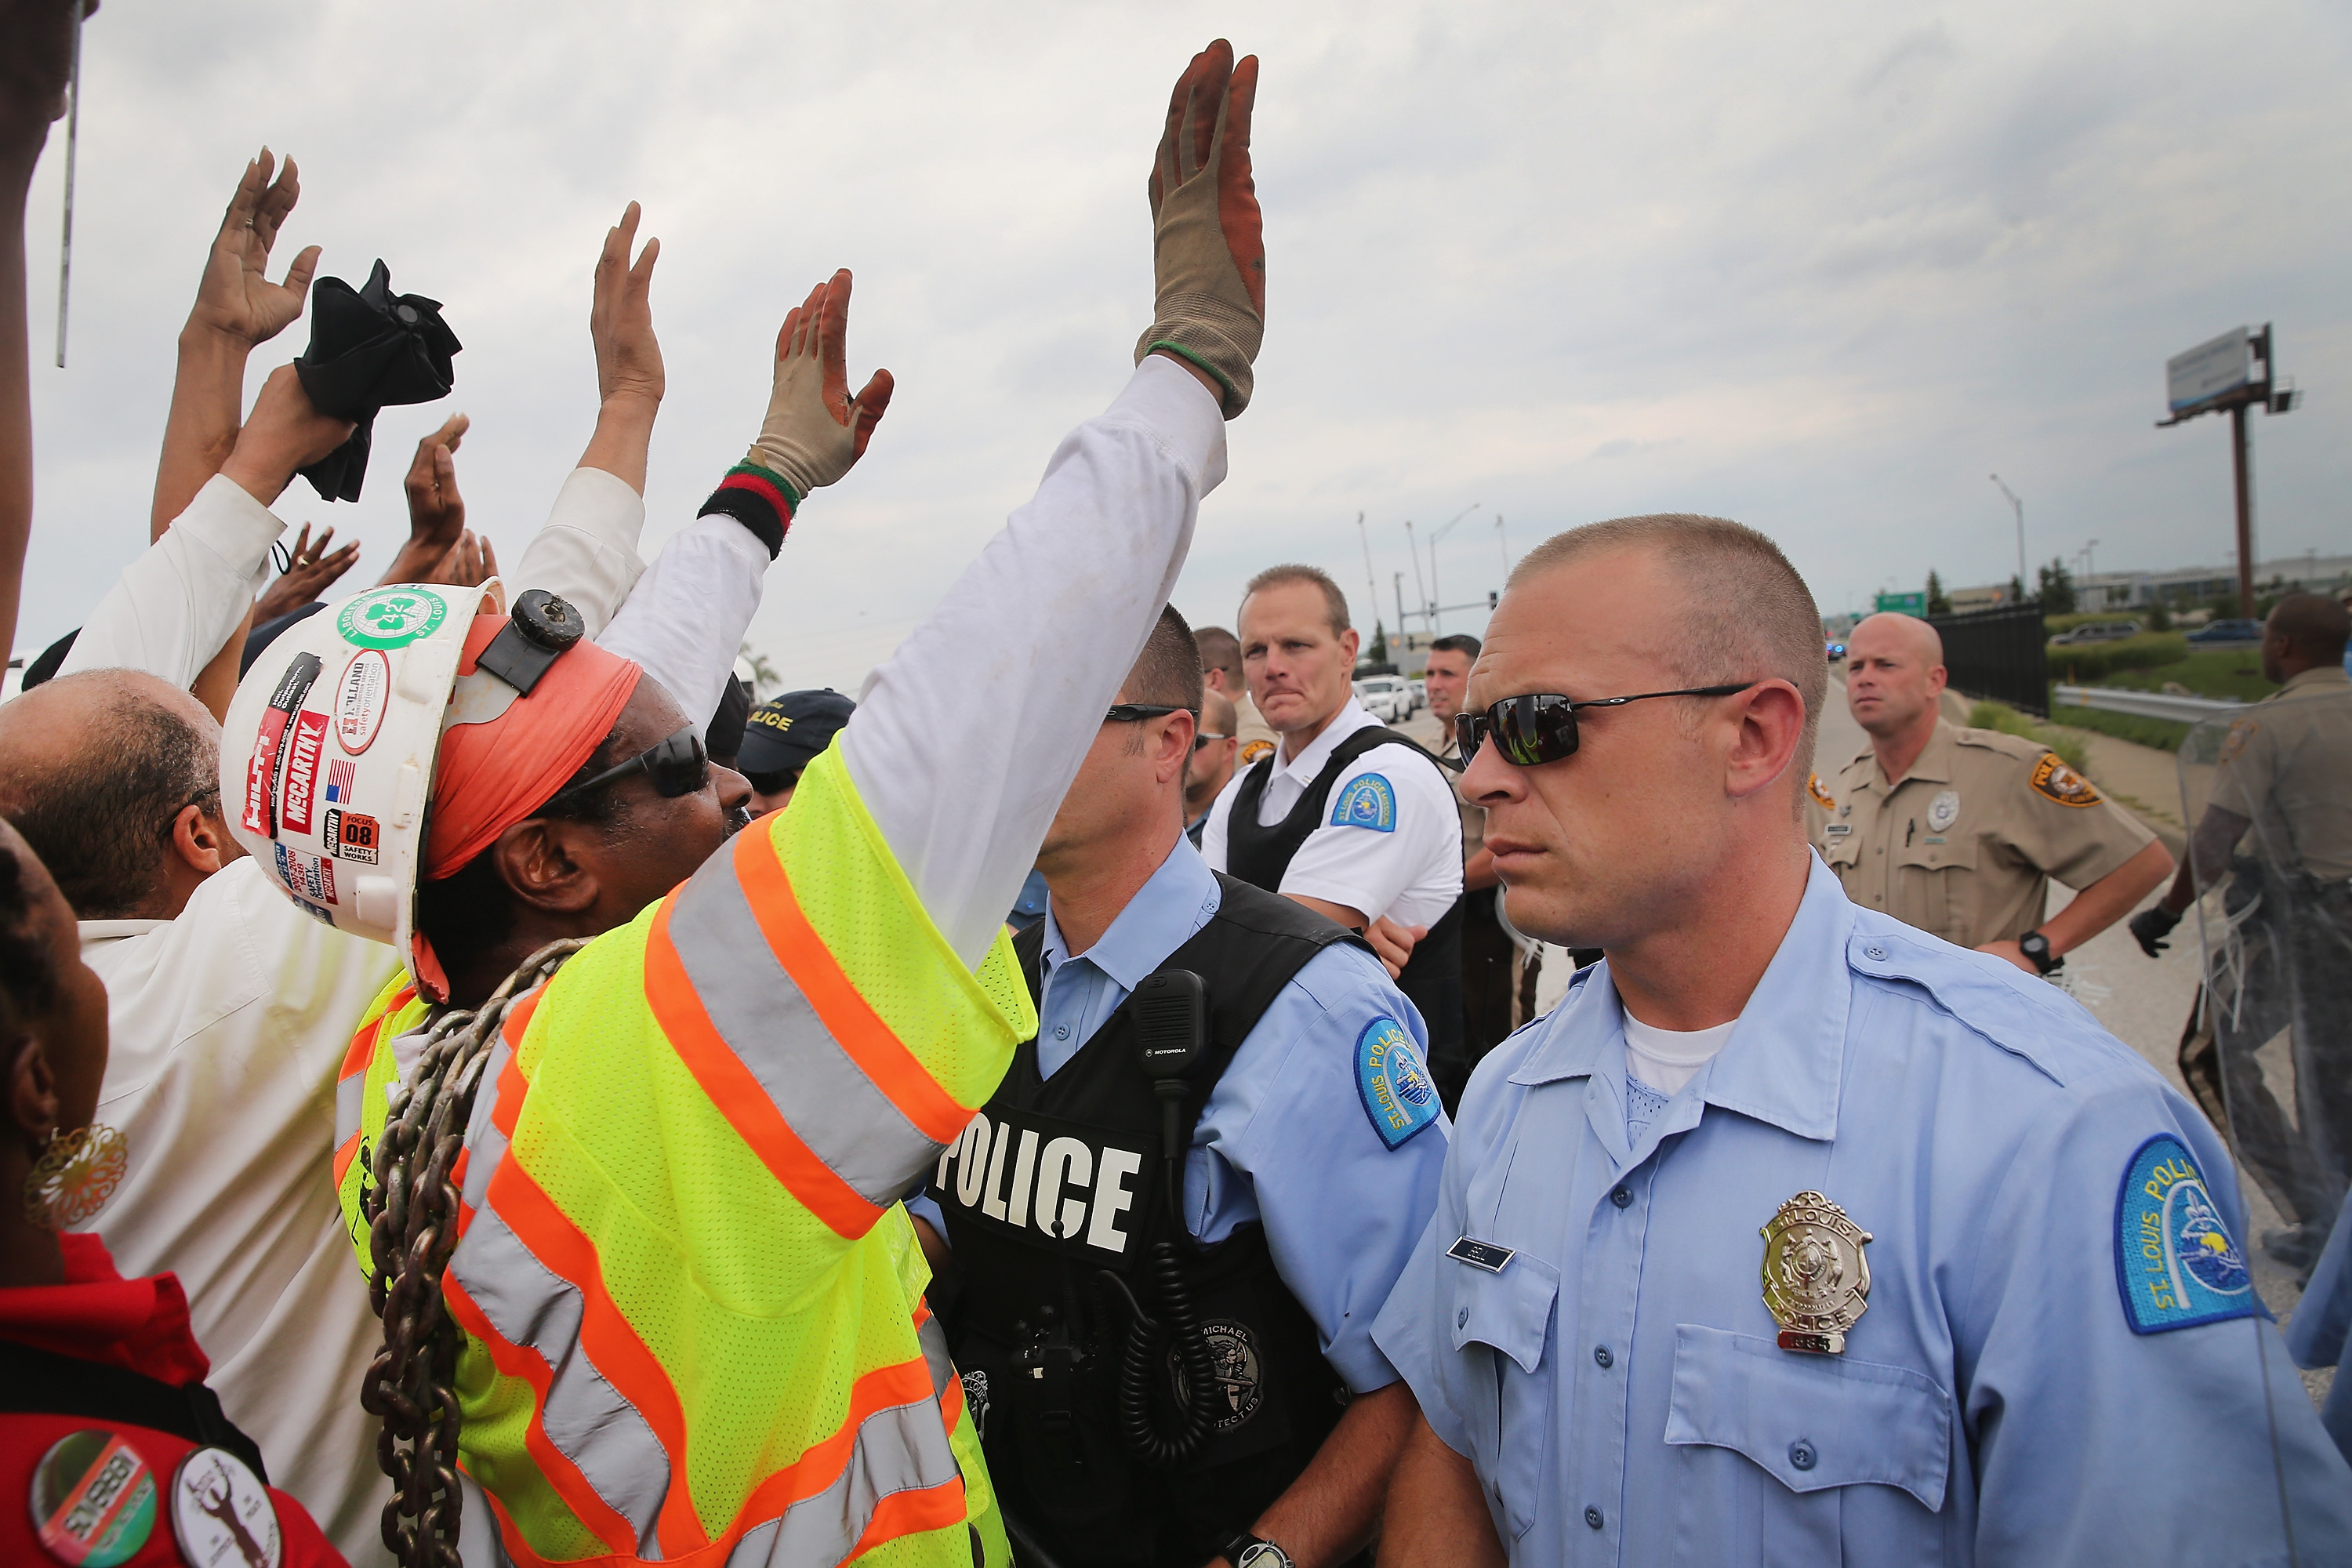 Police block demonstrators from gaining access to Interstate Highway 70 on September 10, 2014 near Ferguson, Missouri. (Photo by Scott Olson/Getty Images)